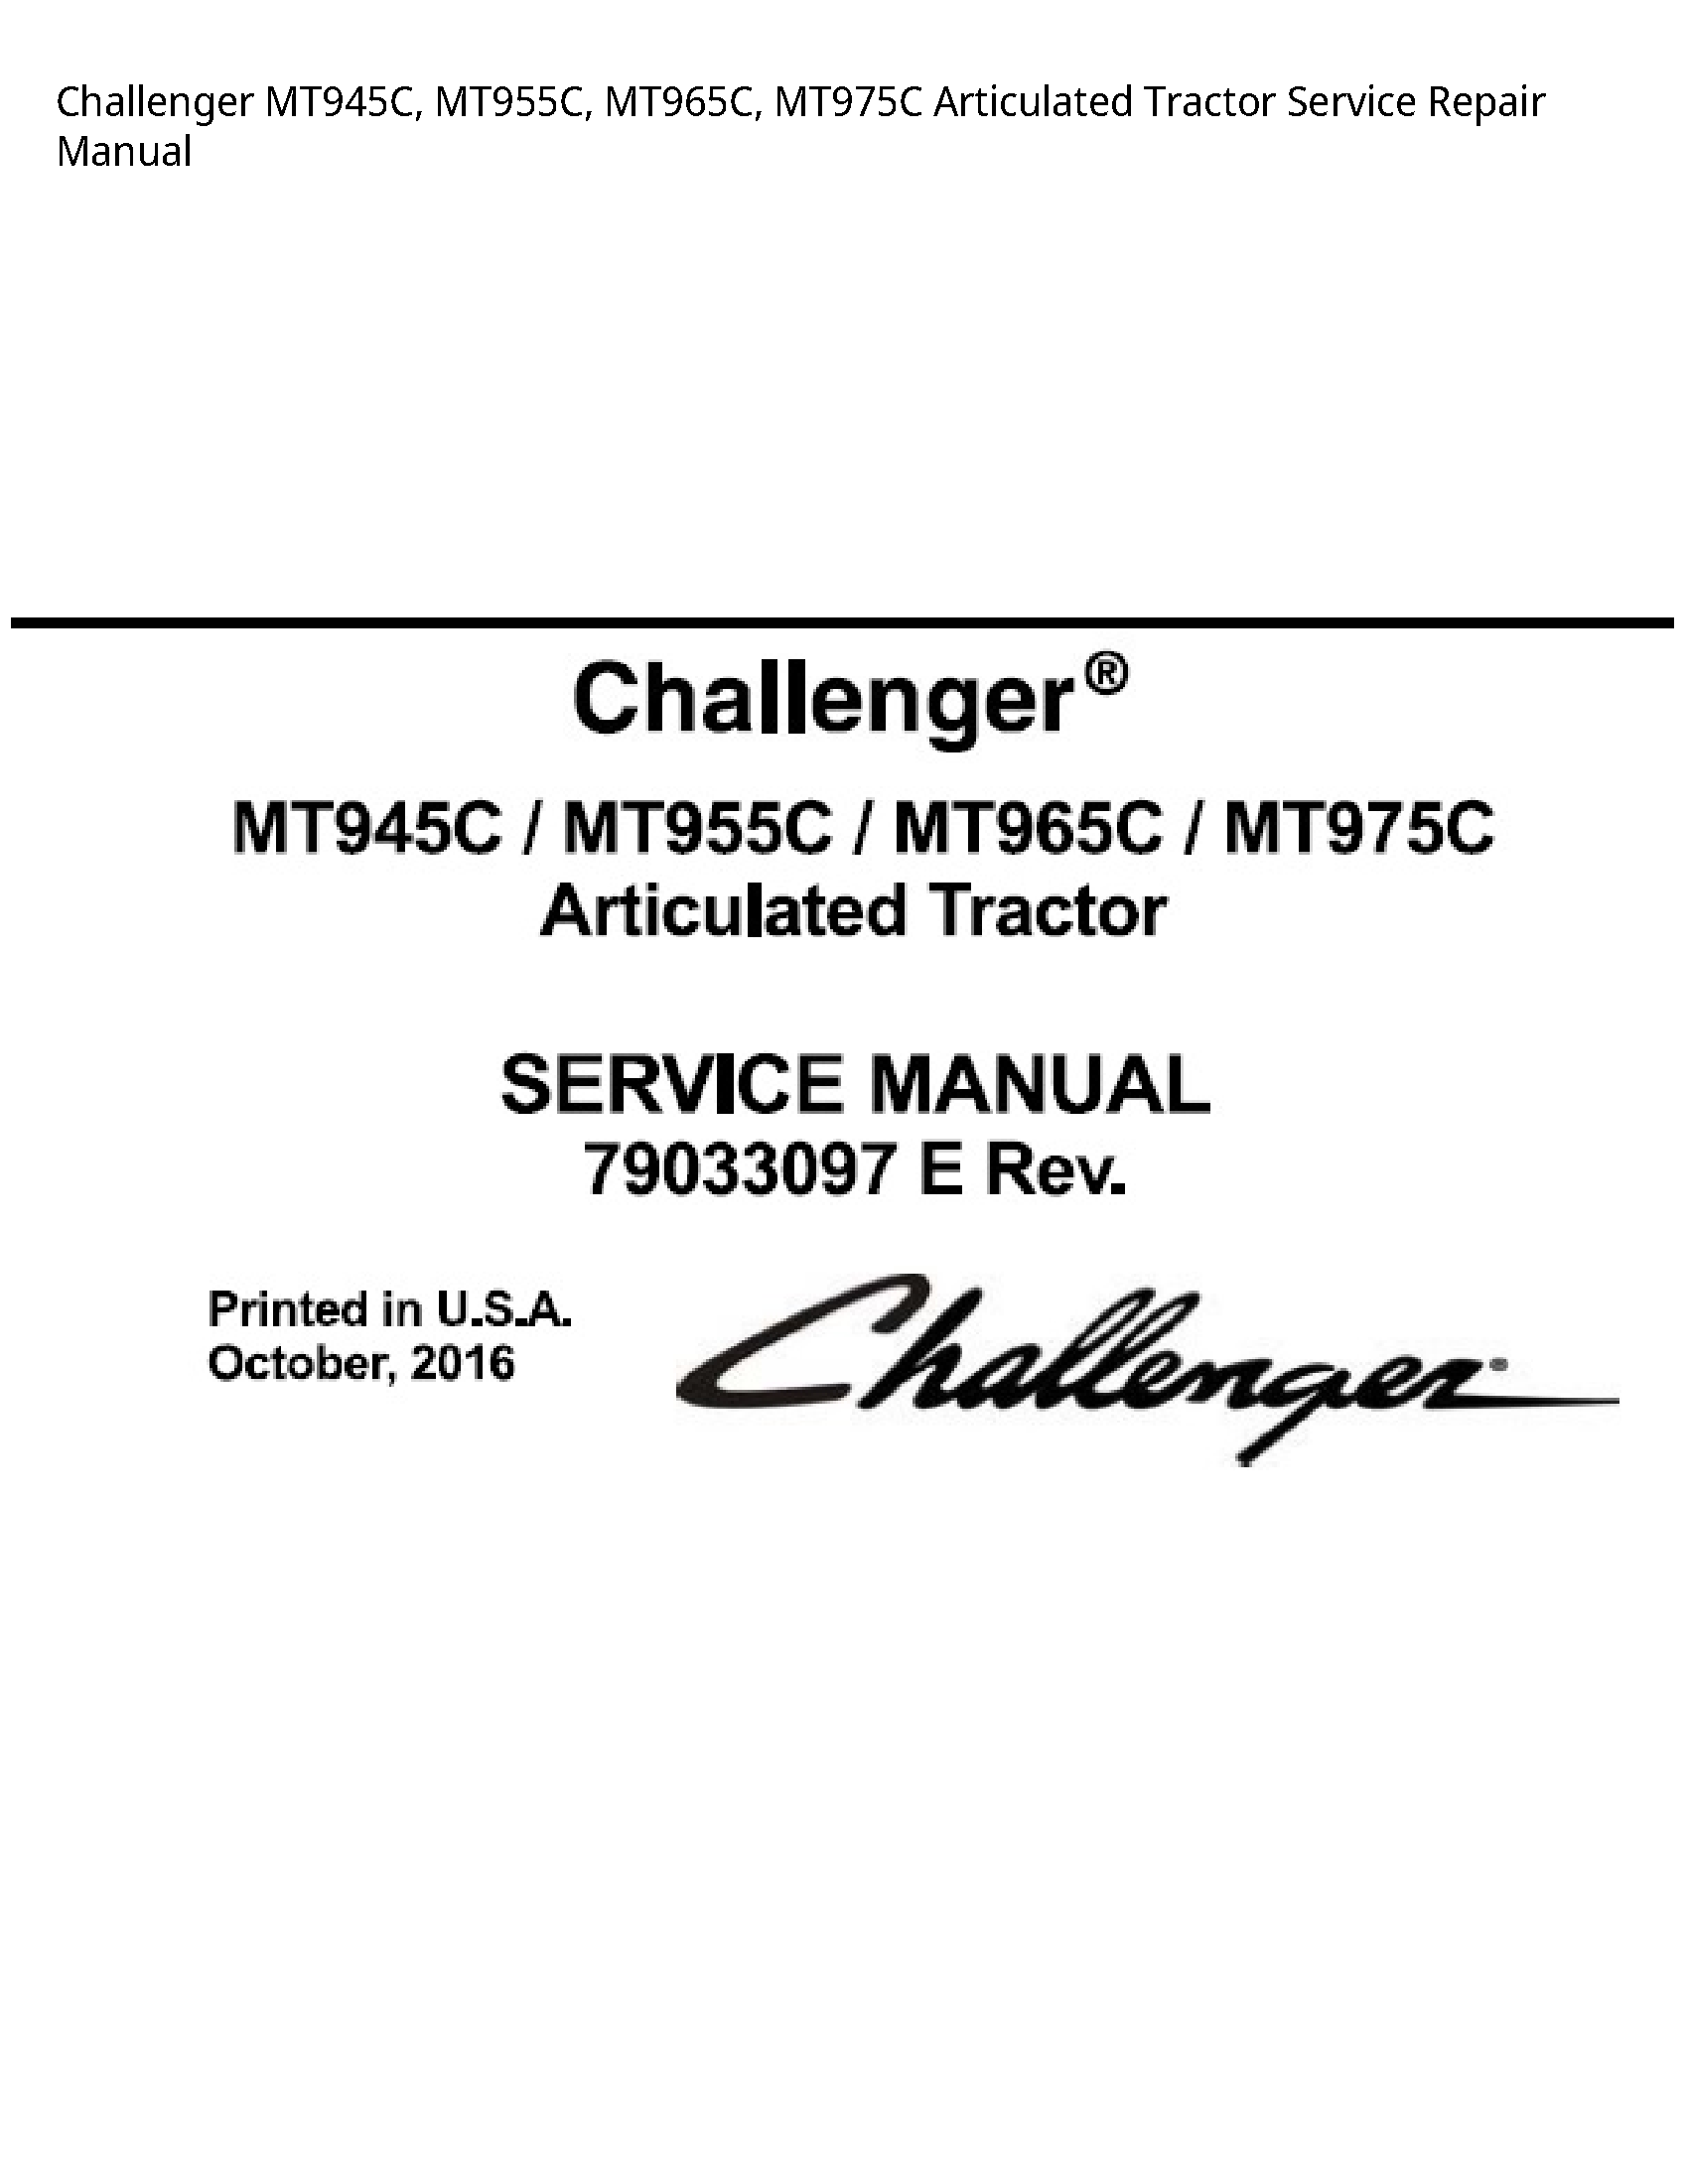 Challenger MT945C Articulated Tractor manual